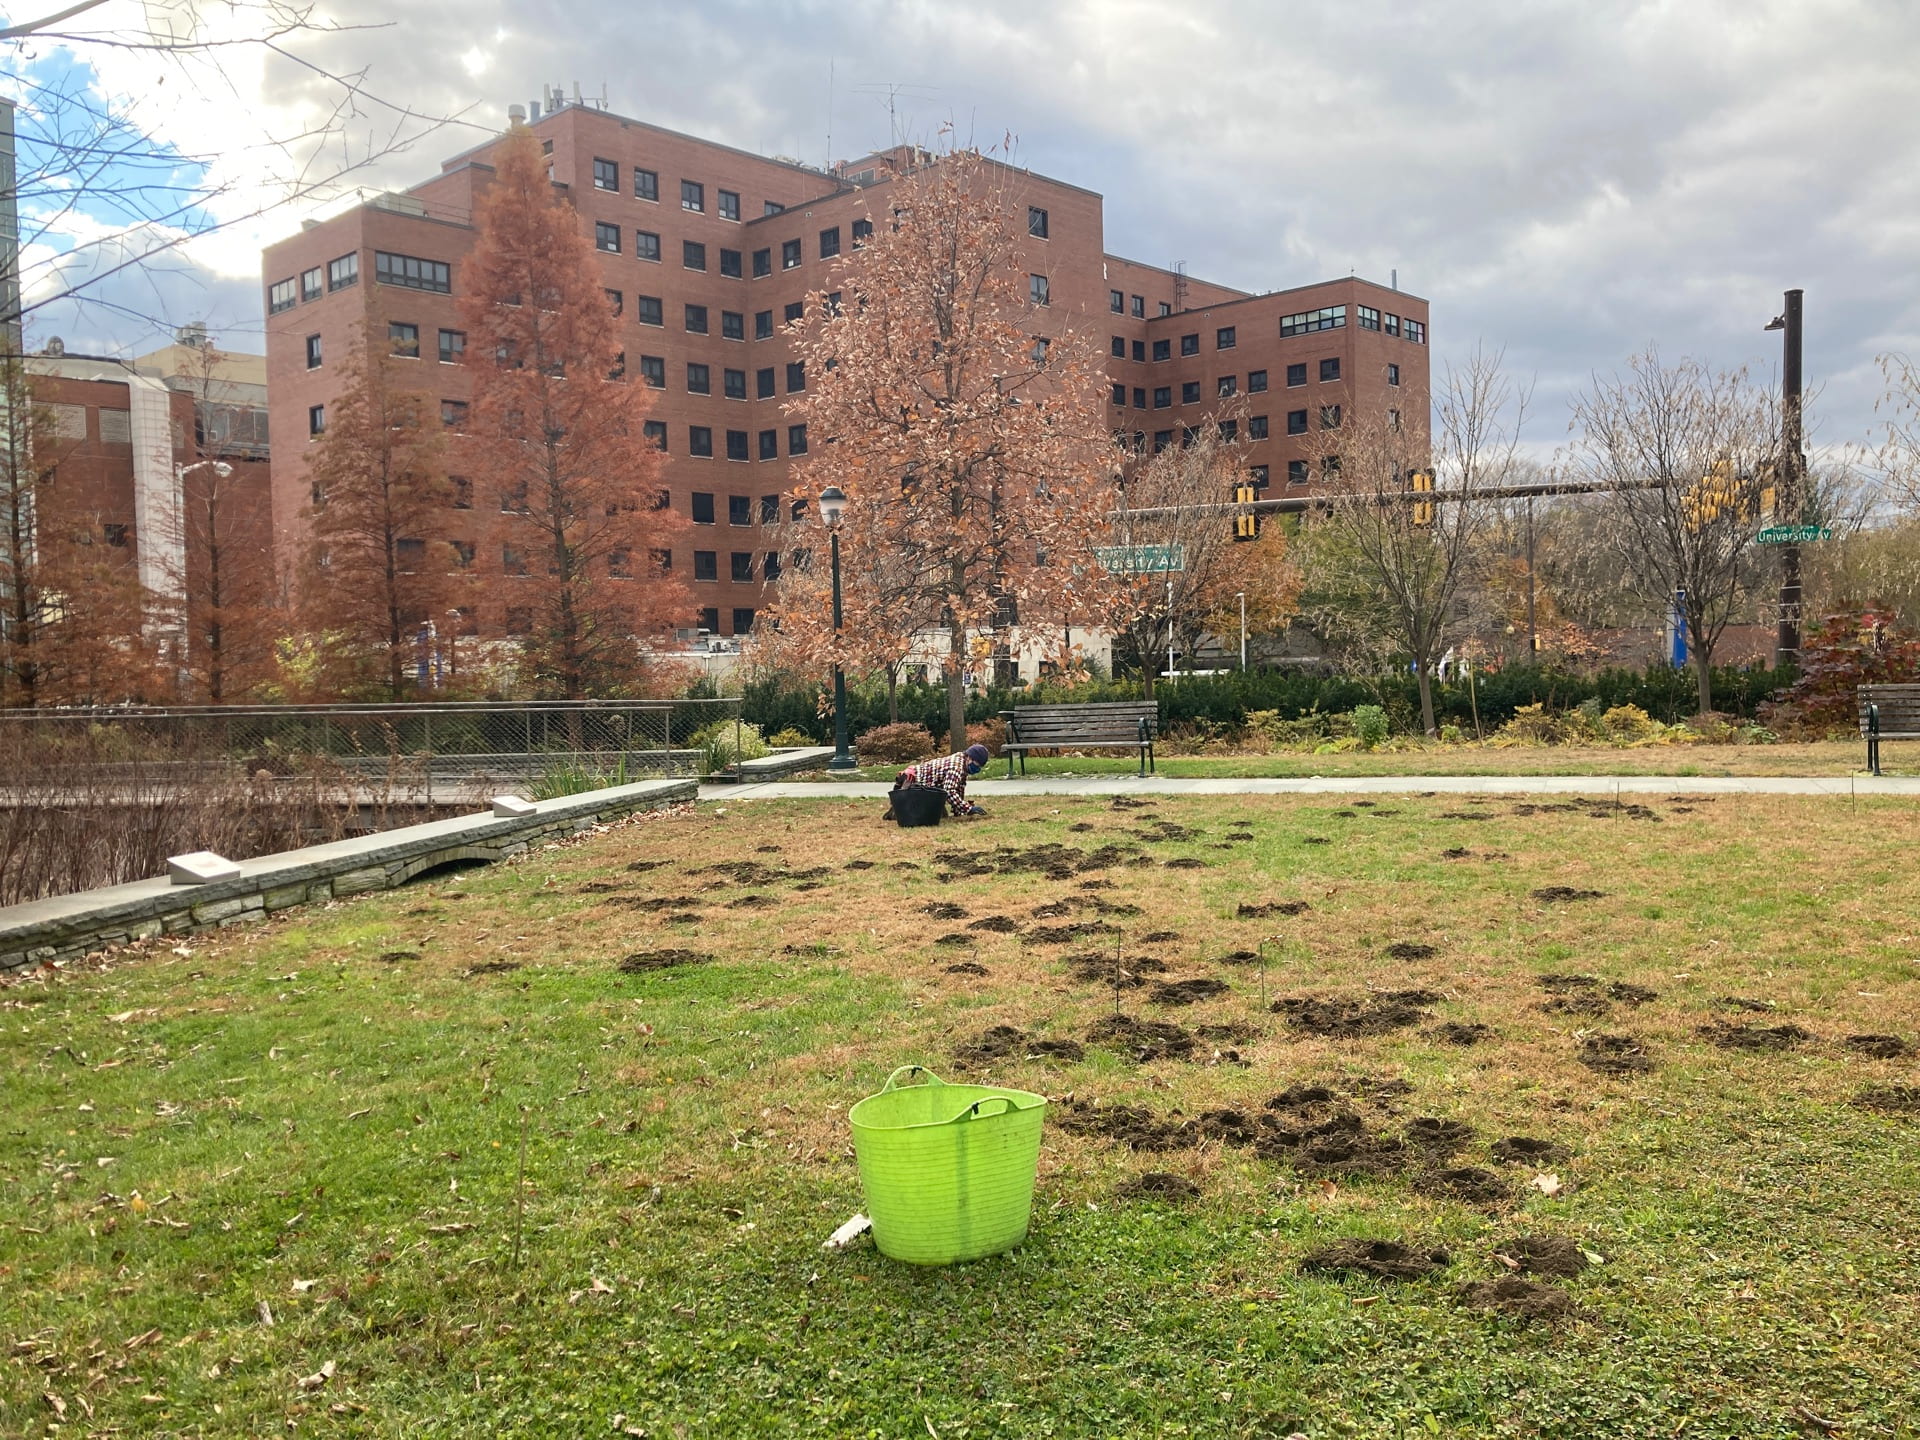 1,500 Crocus bulbs were planted in the Plaza Lawn. These will bloom in late winter and be dormant for the rest of the year.